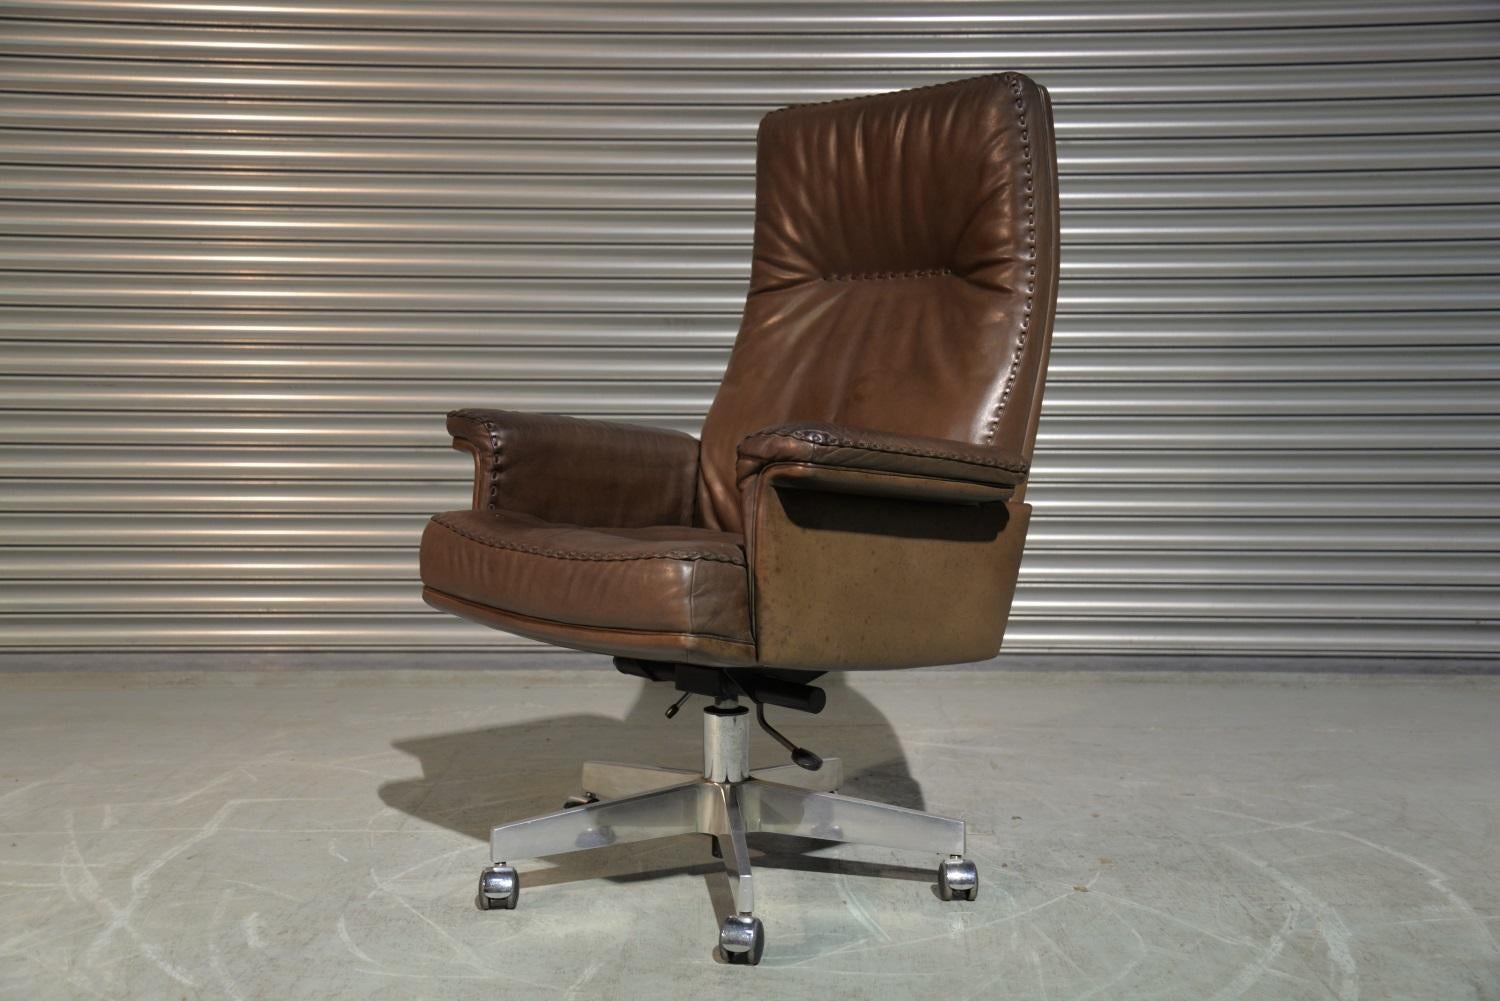 Discounted airfreight for our US and International customers ( from 2 weeks door to door) 

We are delighted to bring to you an extremely rare vintage De Sede DS 35 Executive armchair on casters. Built to incredibly high standards by De Sede